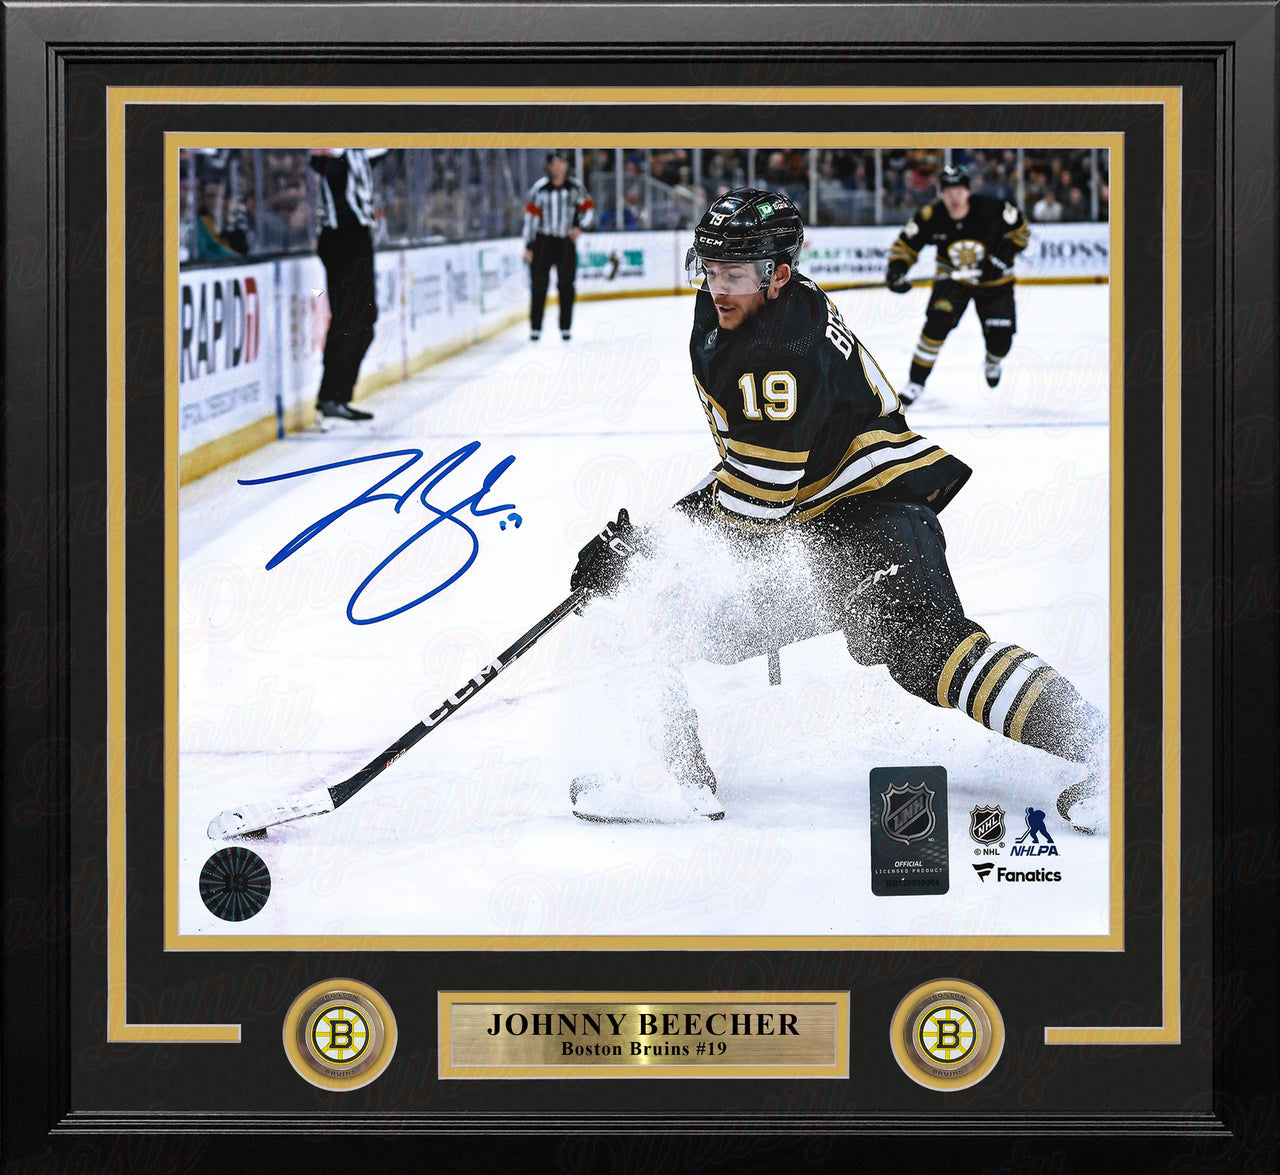 Johnny Beecher in Action Boston Bruins Autographed 16" x 20" Framed Hockey Photo